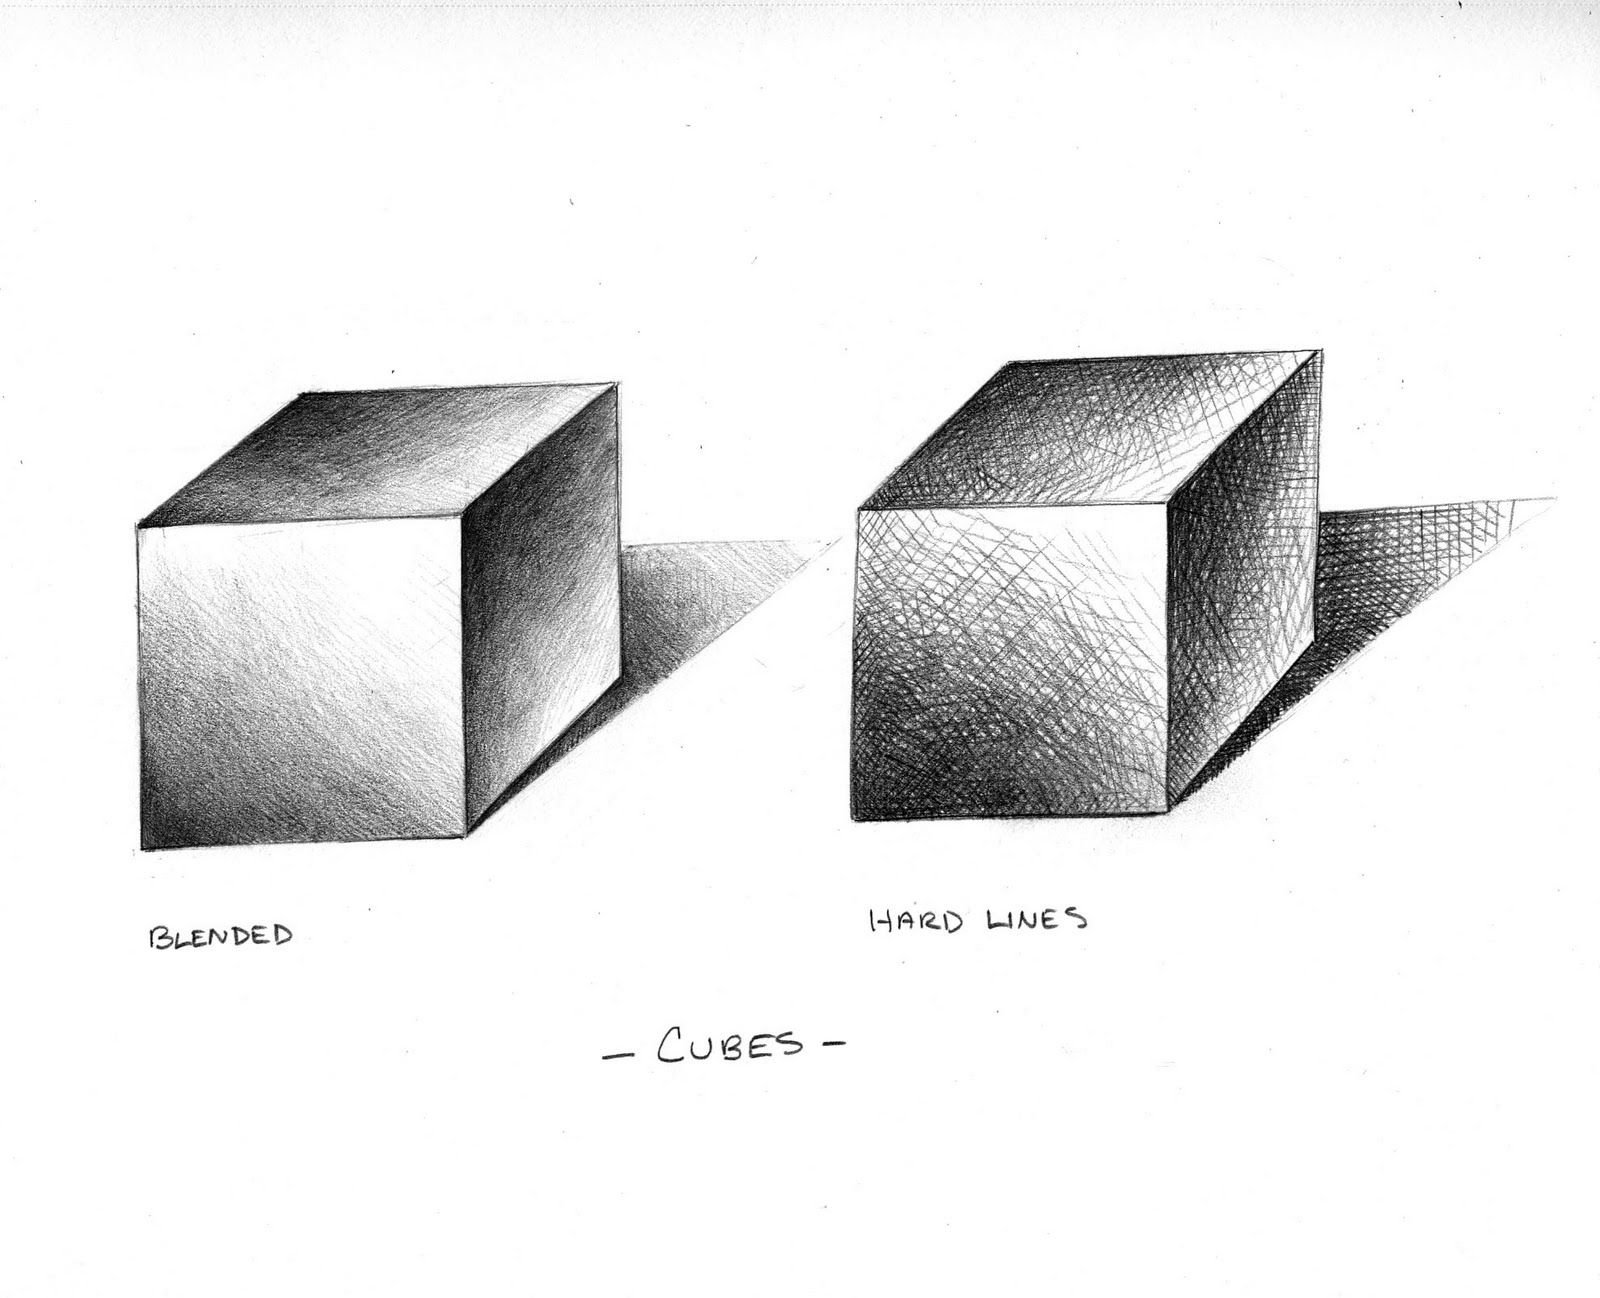 Cube Drawing Creative Style